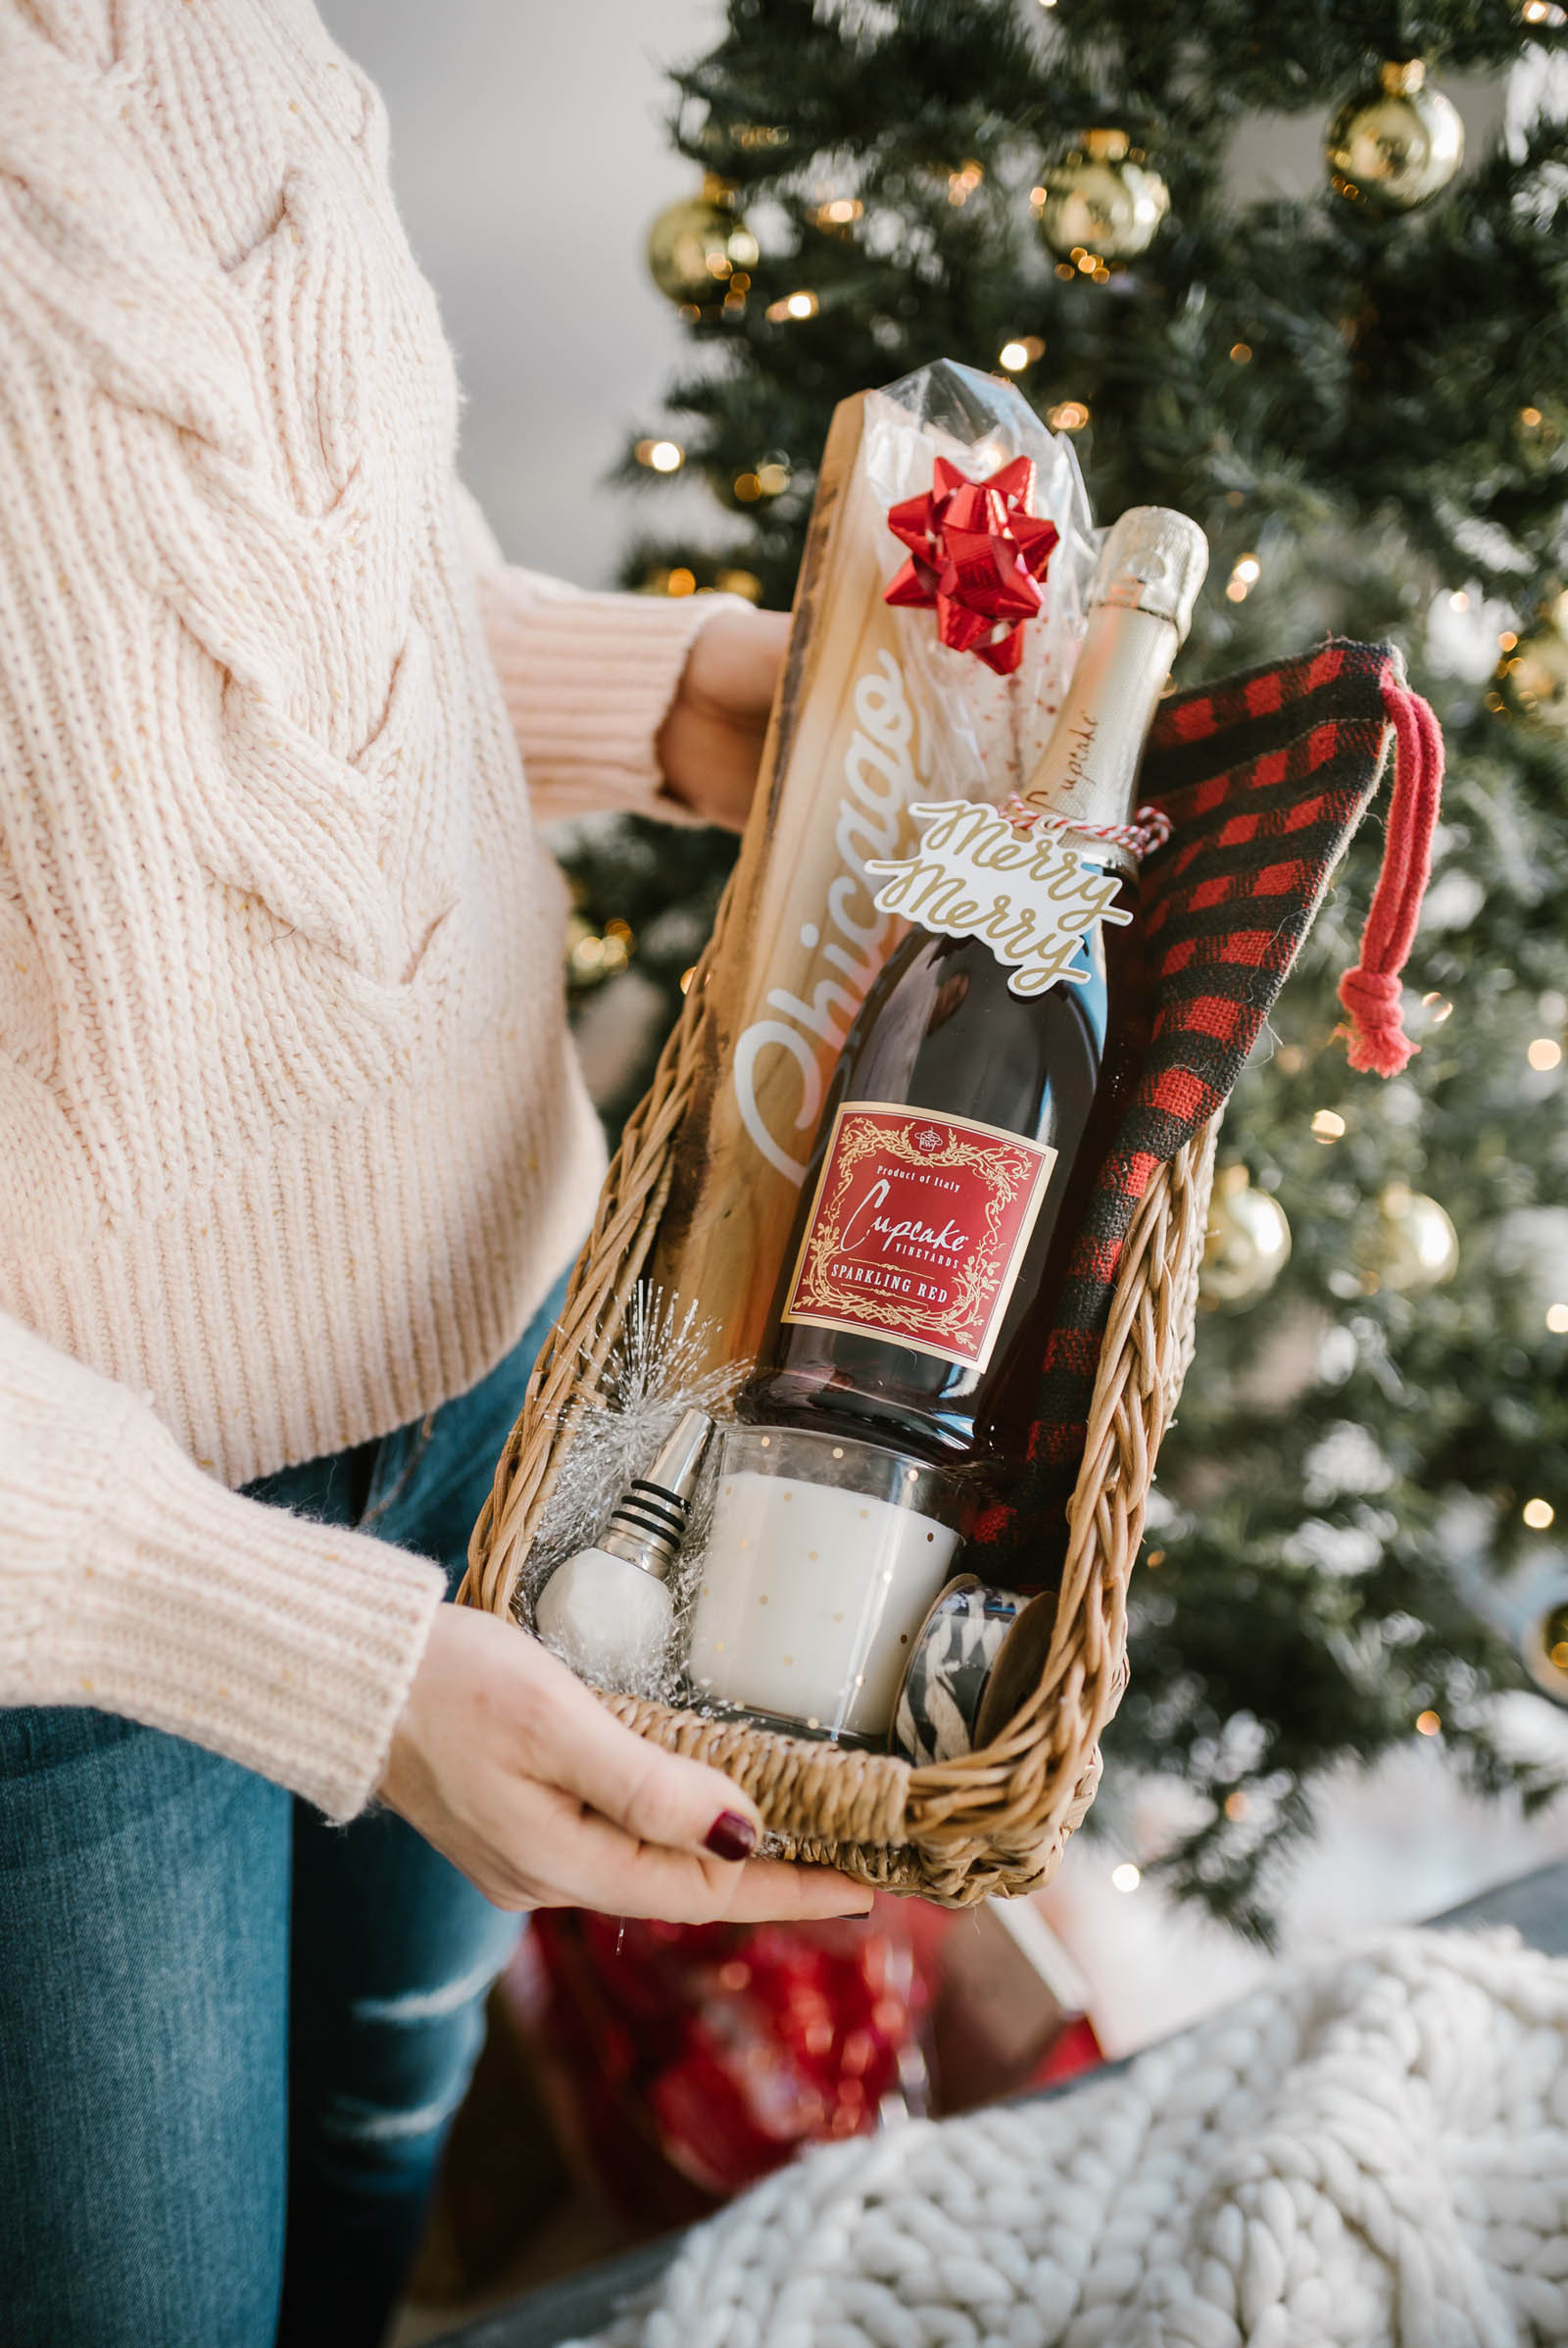 How To Make A Wine Gift Basket Ideas
 Last Minute Holiday Idea Easy Homemade Gift Baskets